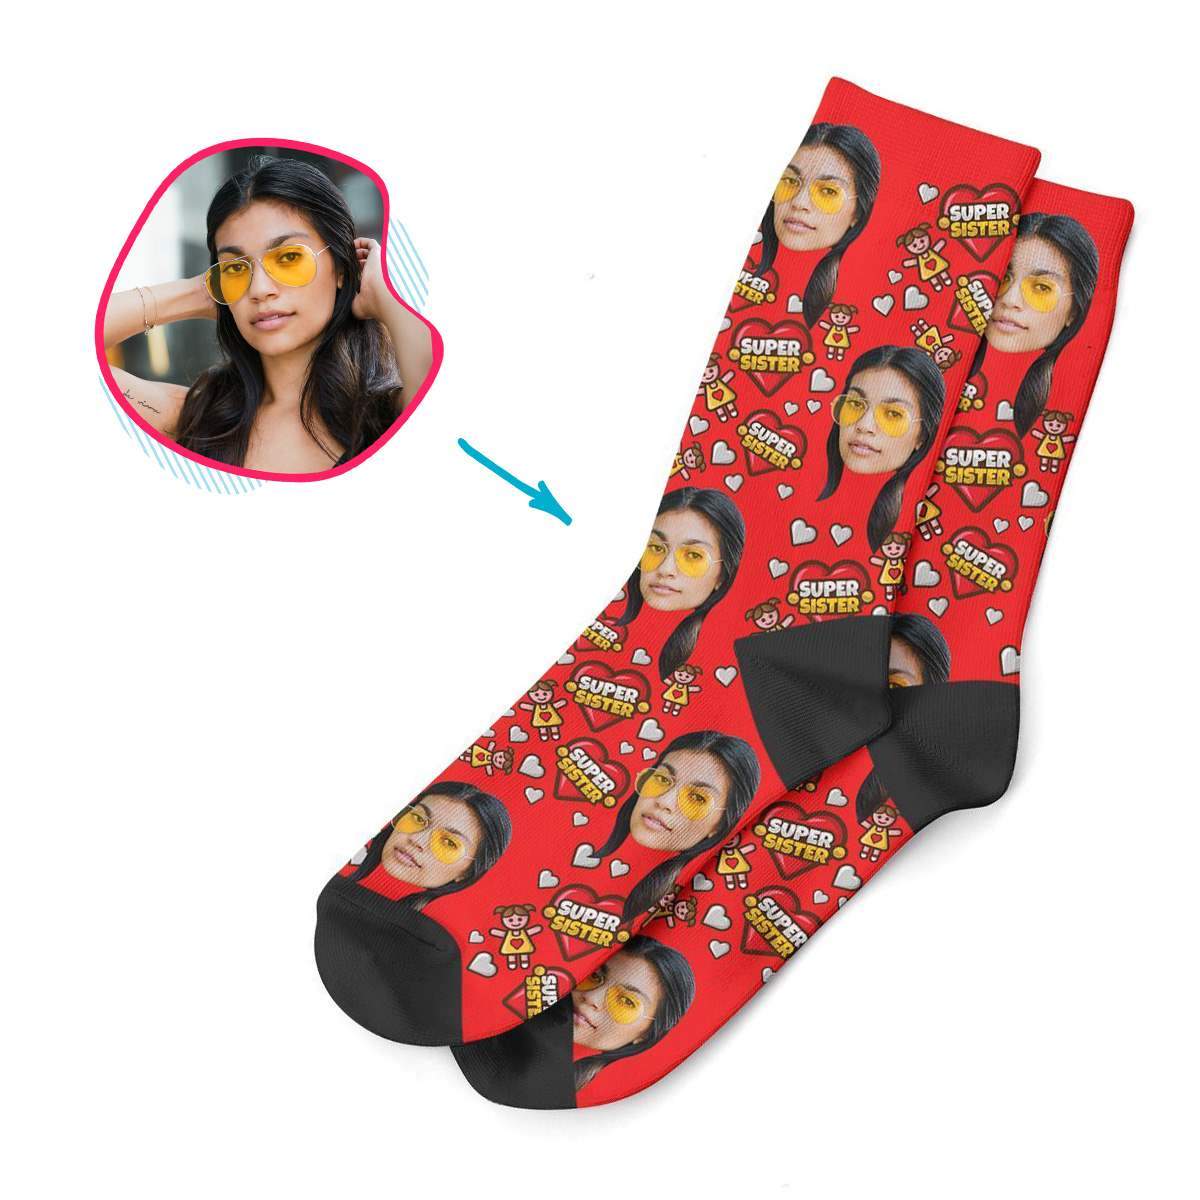 darkblue Super Sister socks personalized with photo of face printed on them